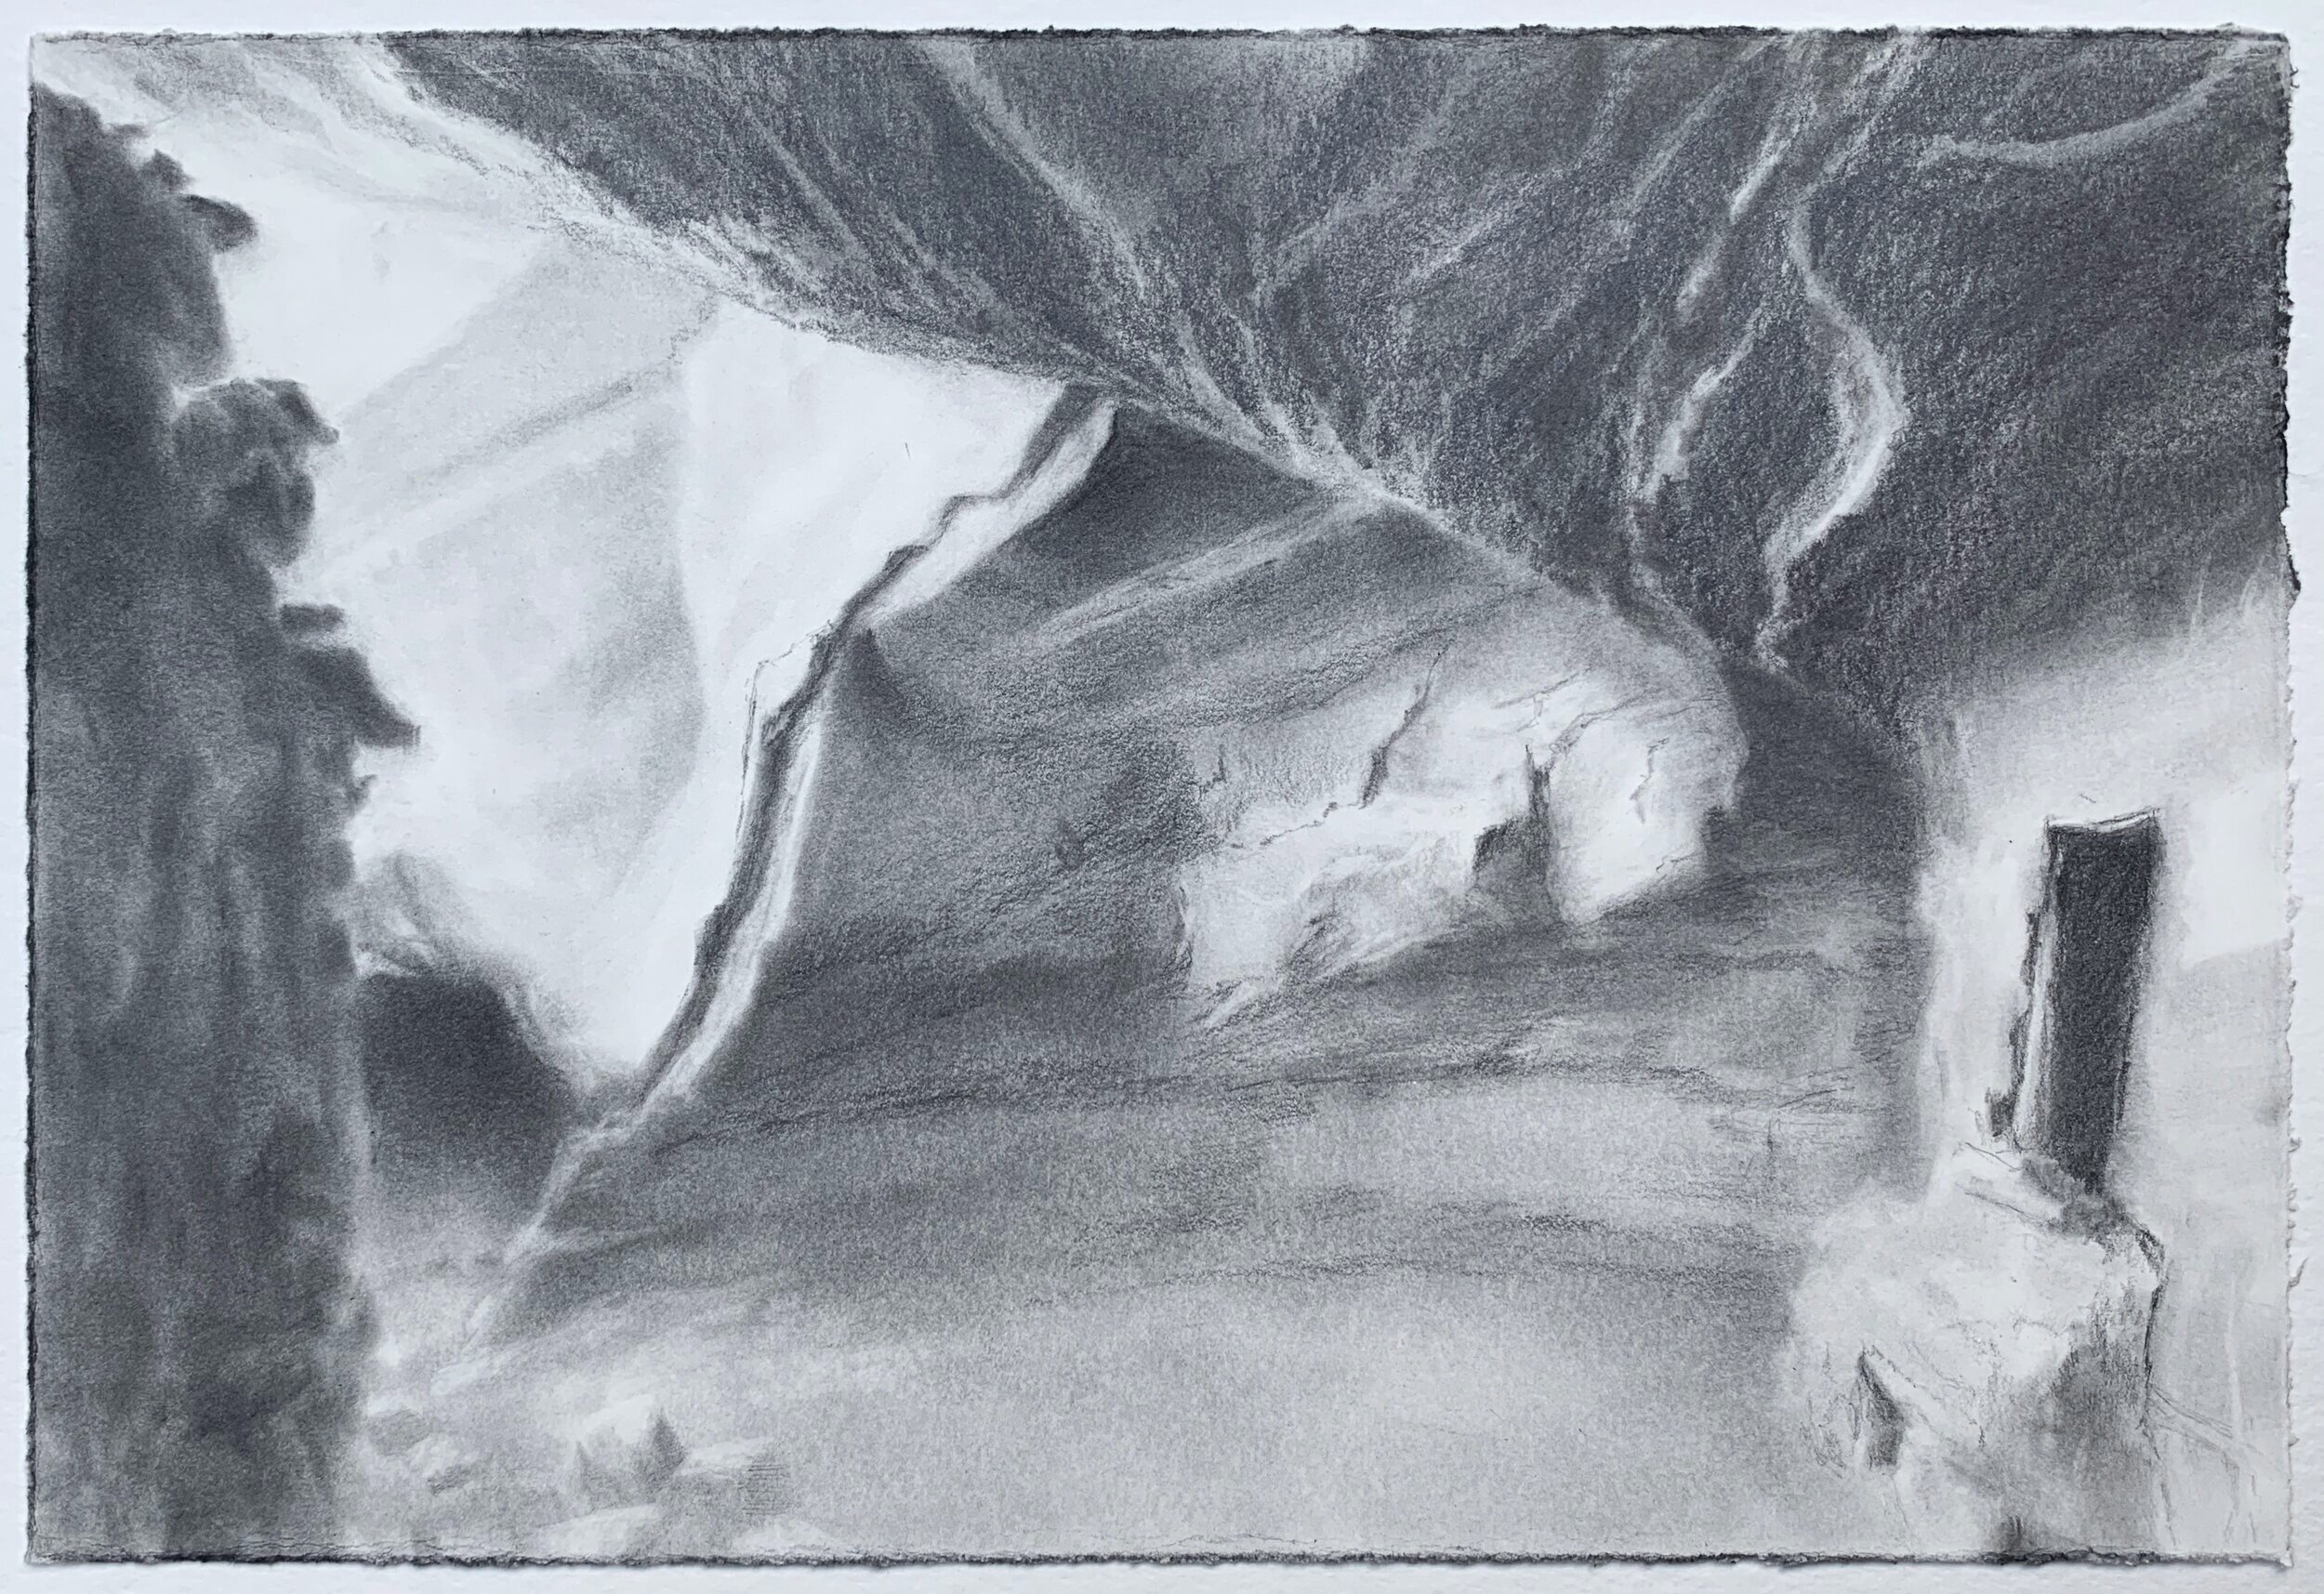   Cliff Dwelling Corridor , 2019 graphite on paper, 7.5 x 11 in 